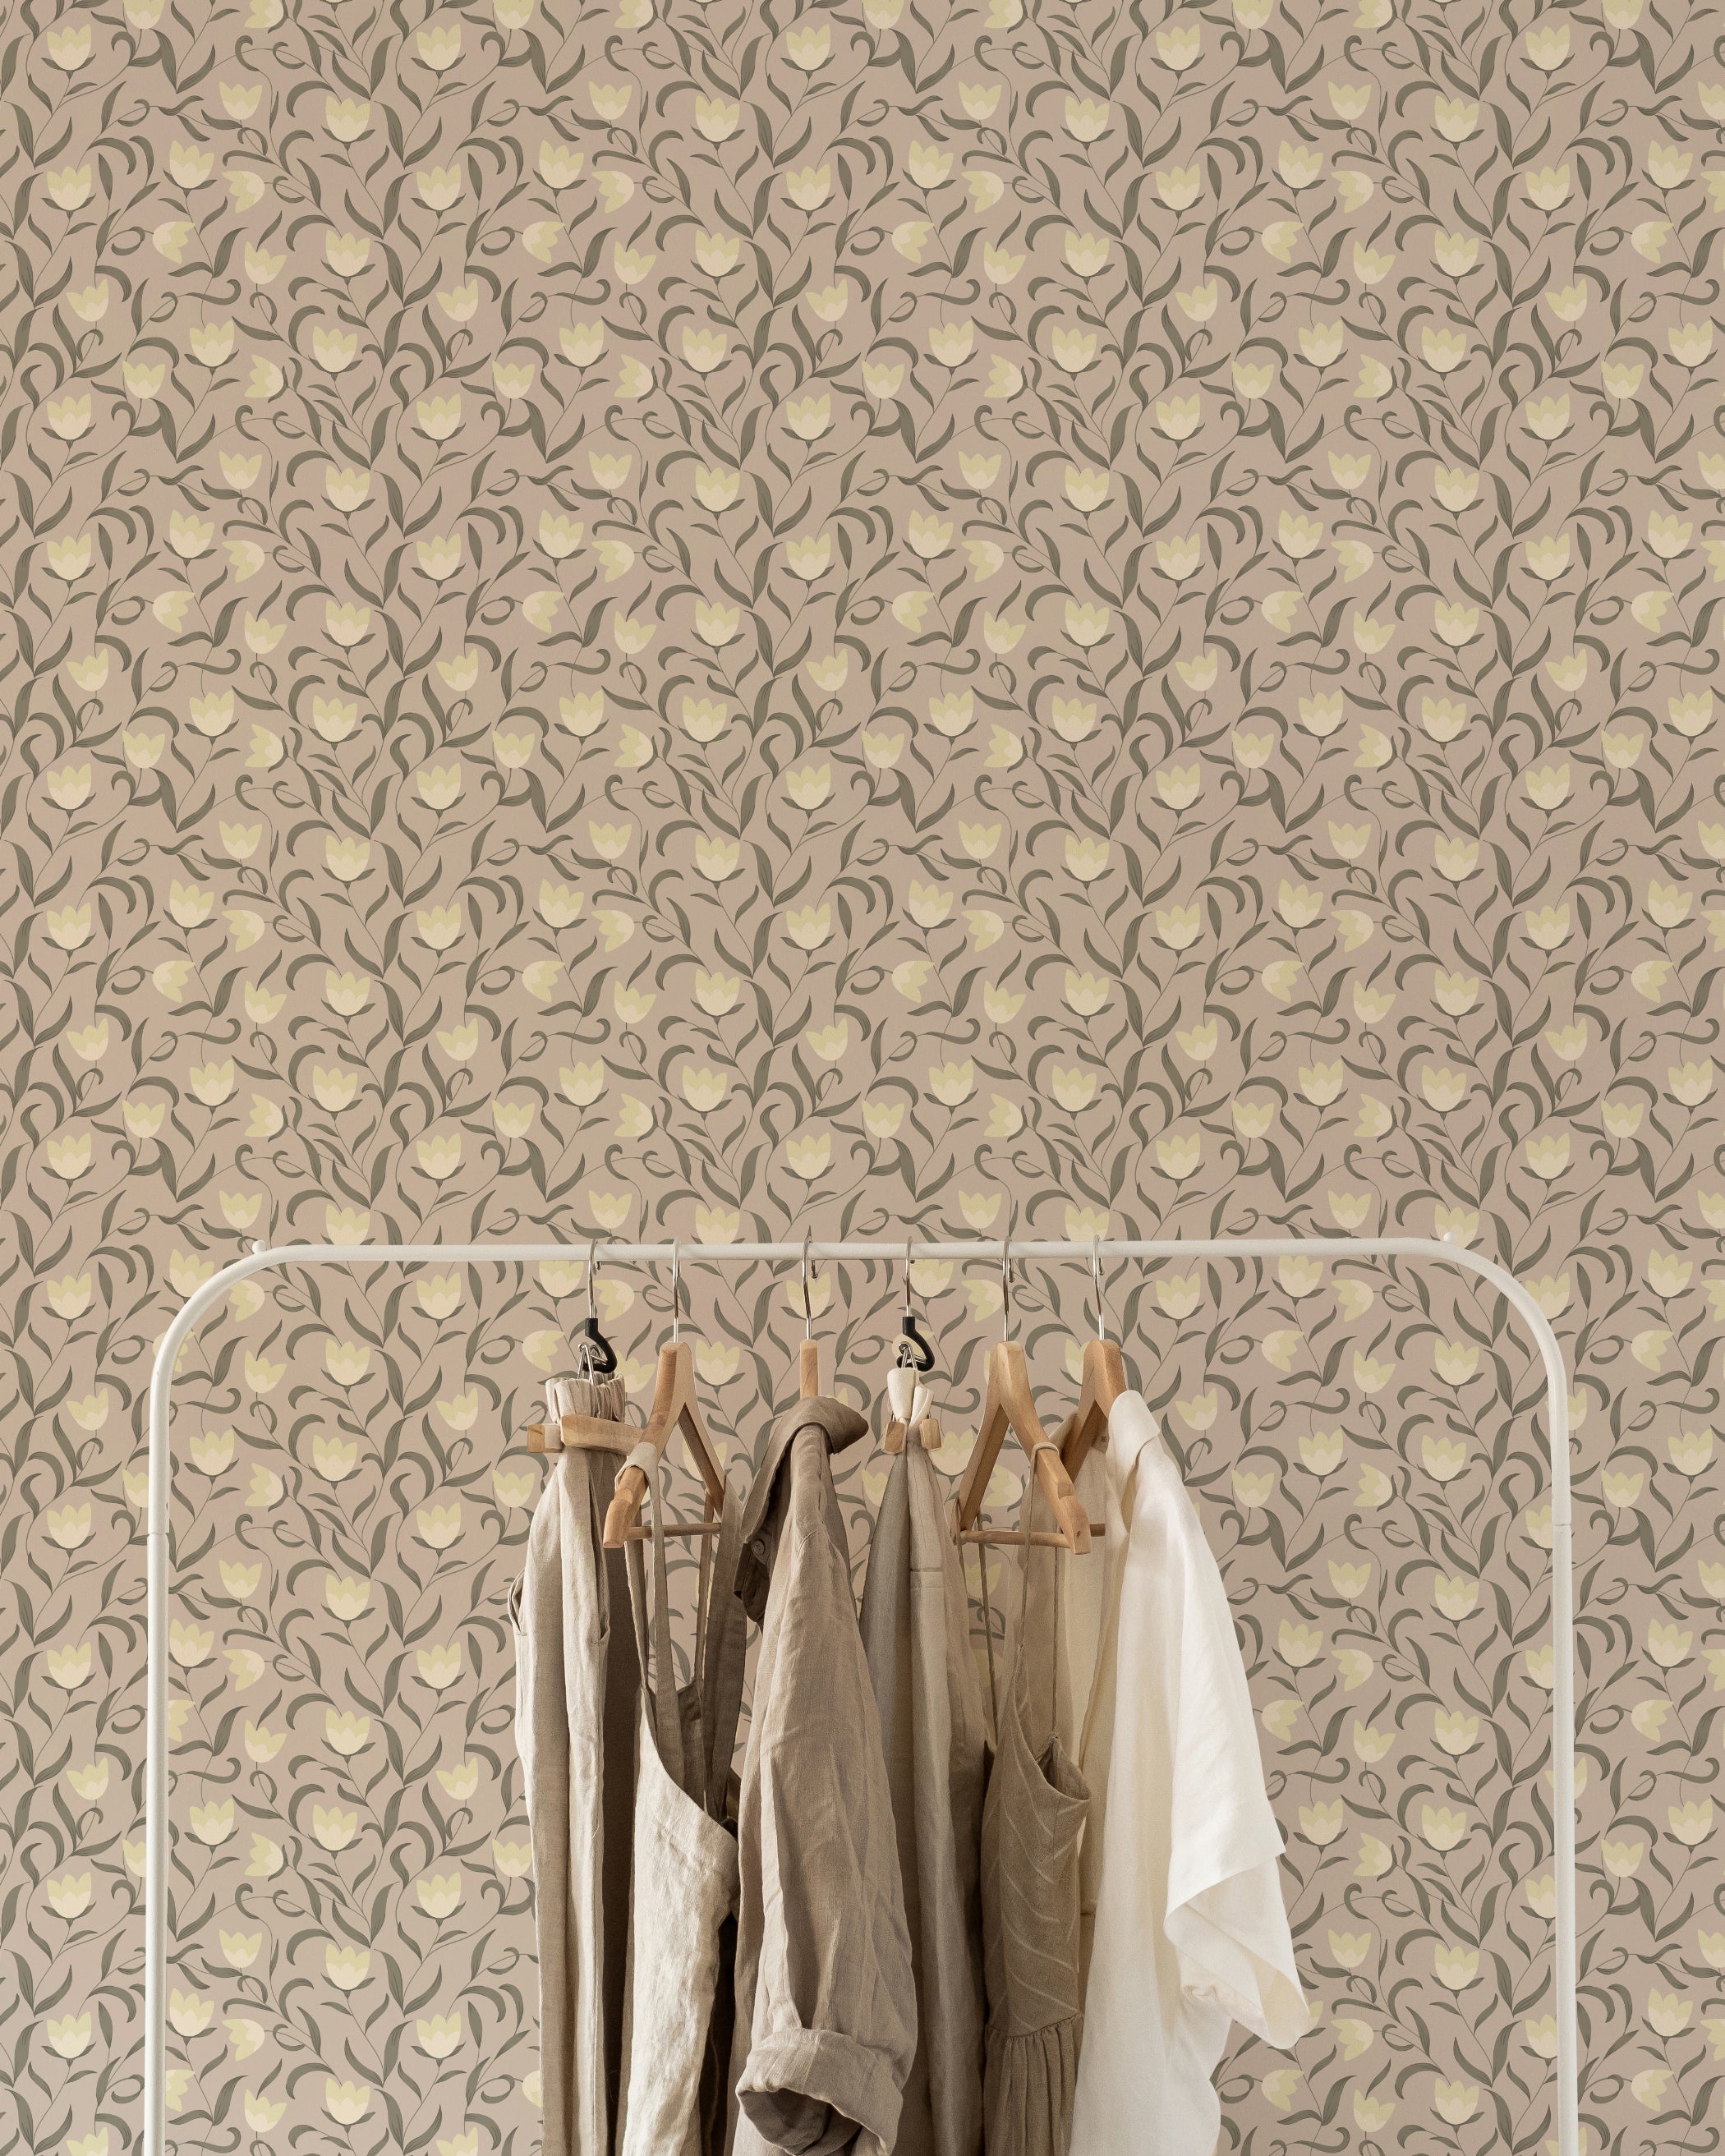 A clothing rack with neutral-toned garments hanging against a backdrop of Timeless Tulips Wallpaper, highlighting the wallpaper's graceful tulip and leaf design in soft, earthy colors.